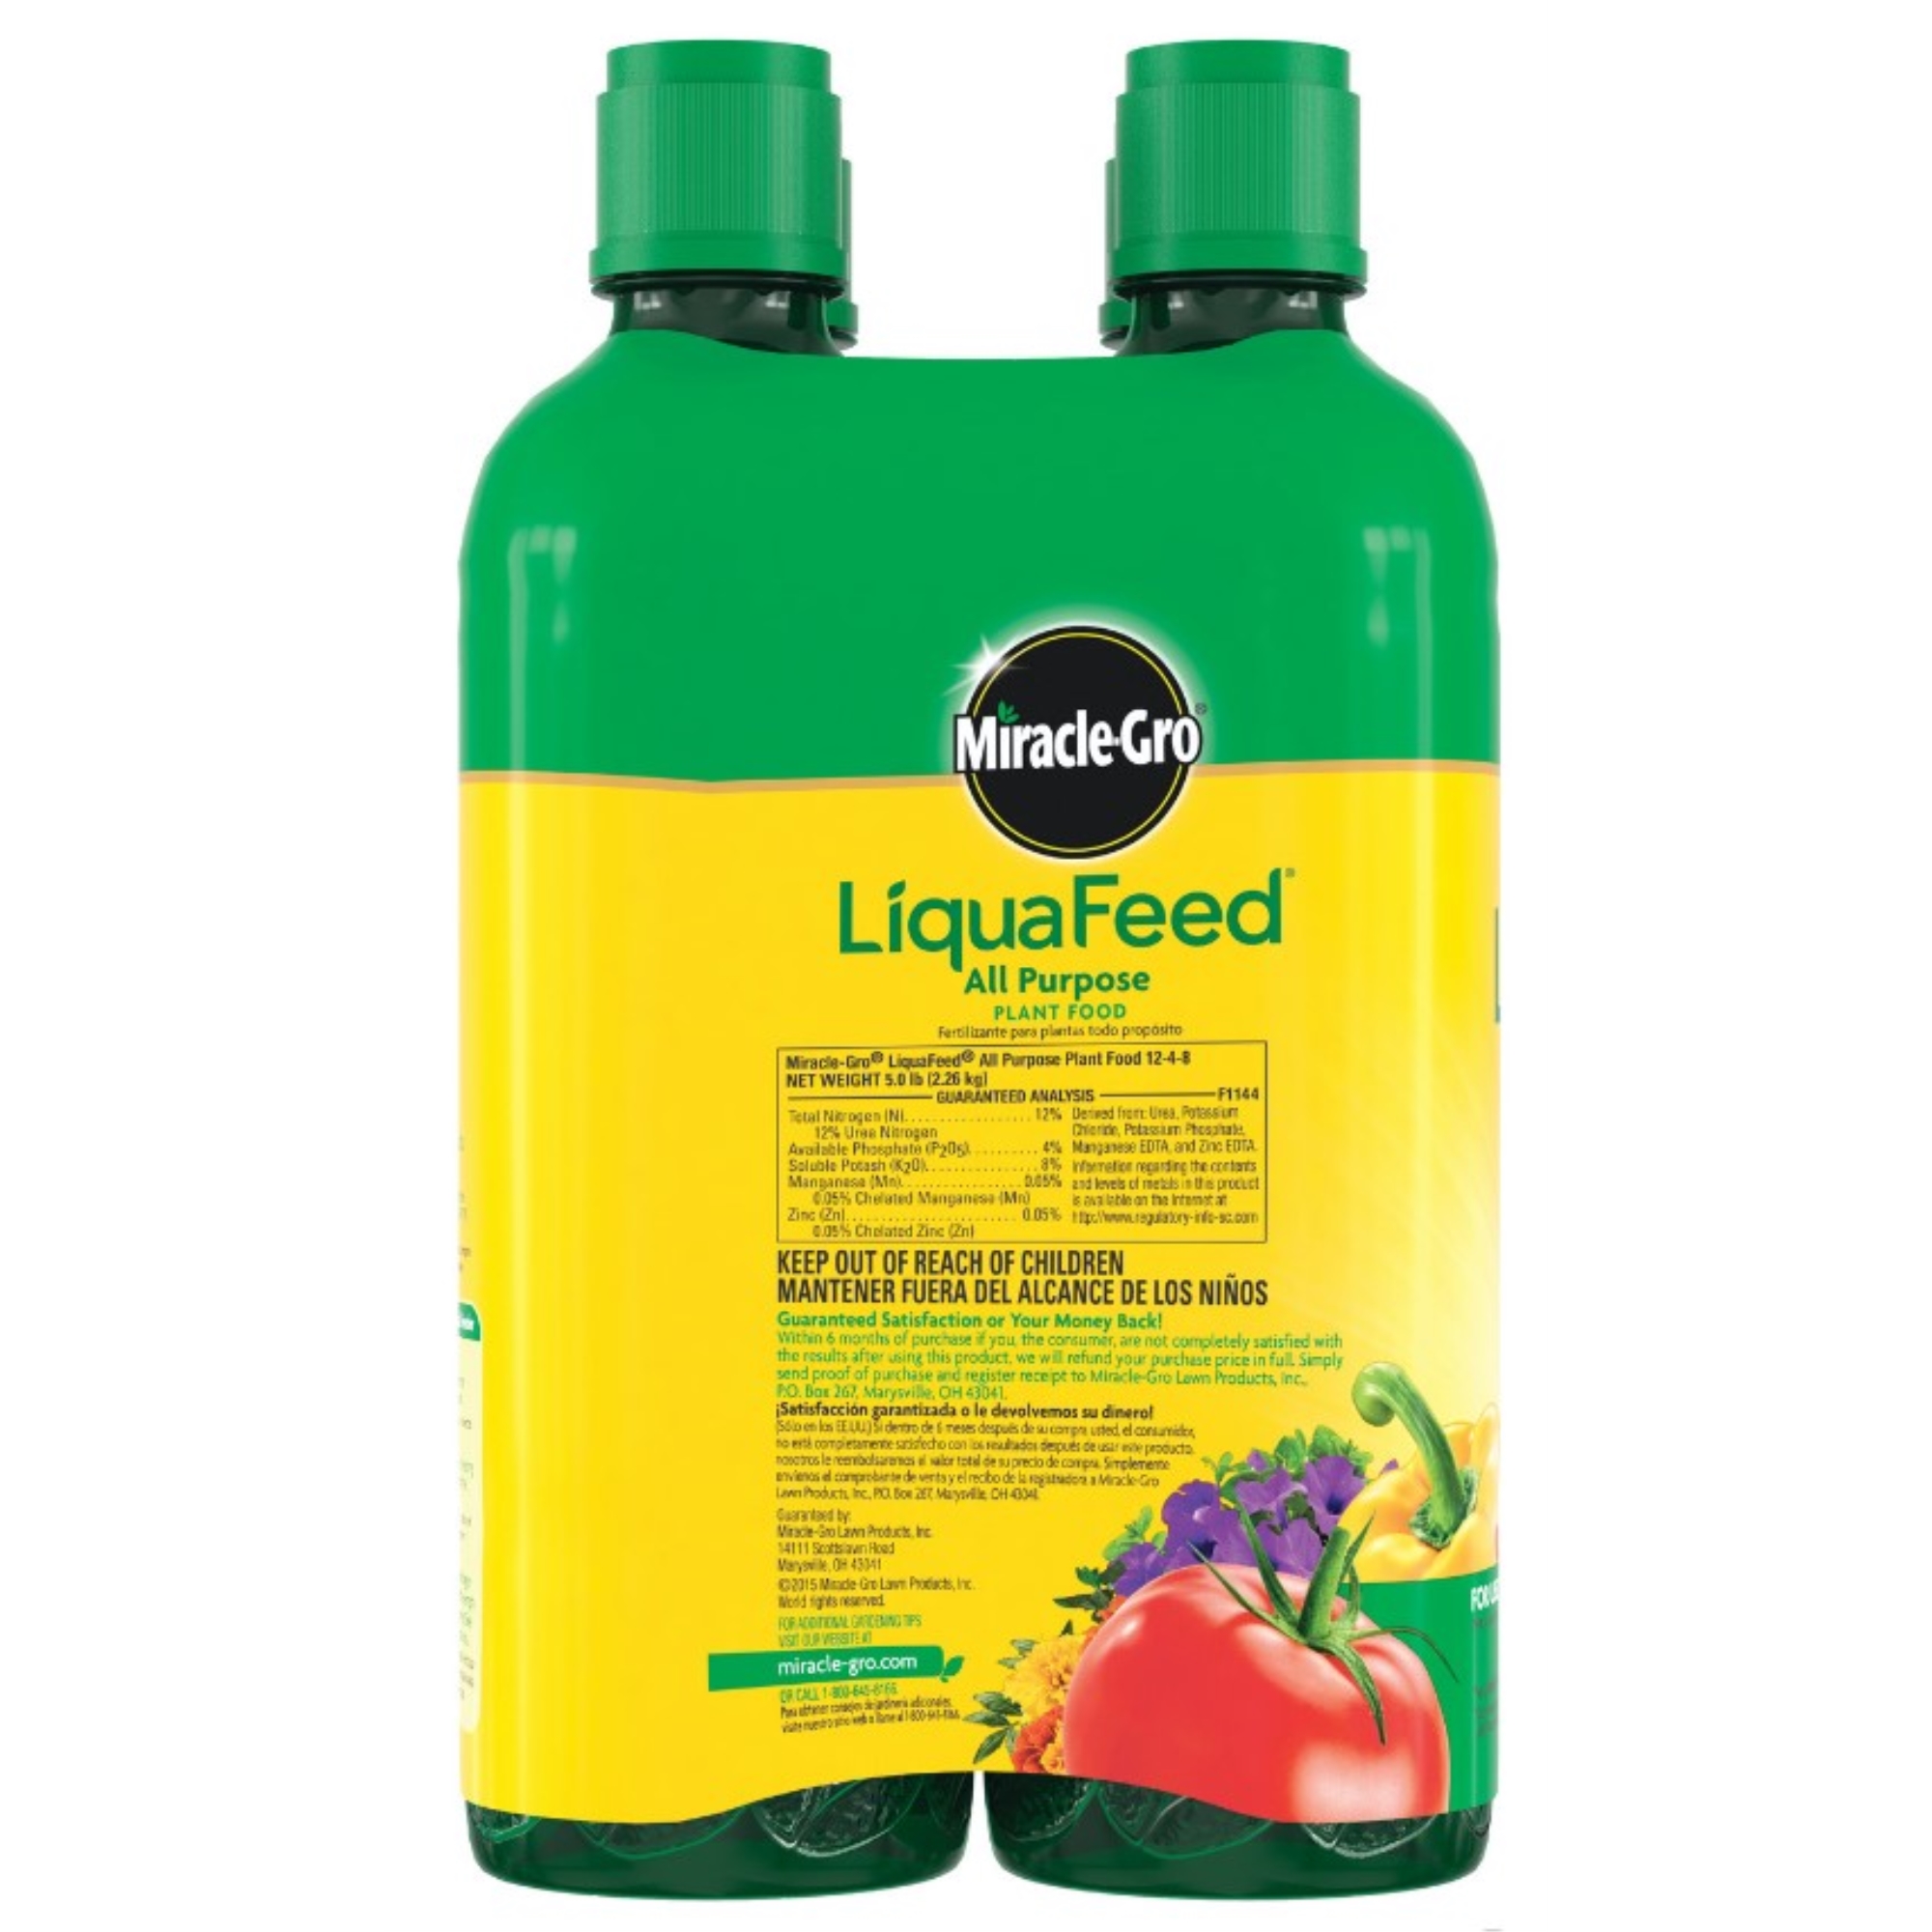 Miracle-Gro Liquafeed All Purpose Plant Food, 4-Pack Refills, 16 fl. oz. - image 3 of 9